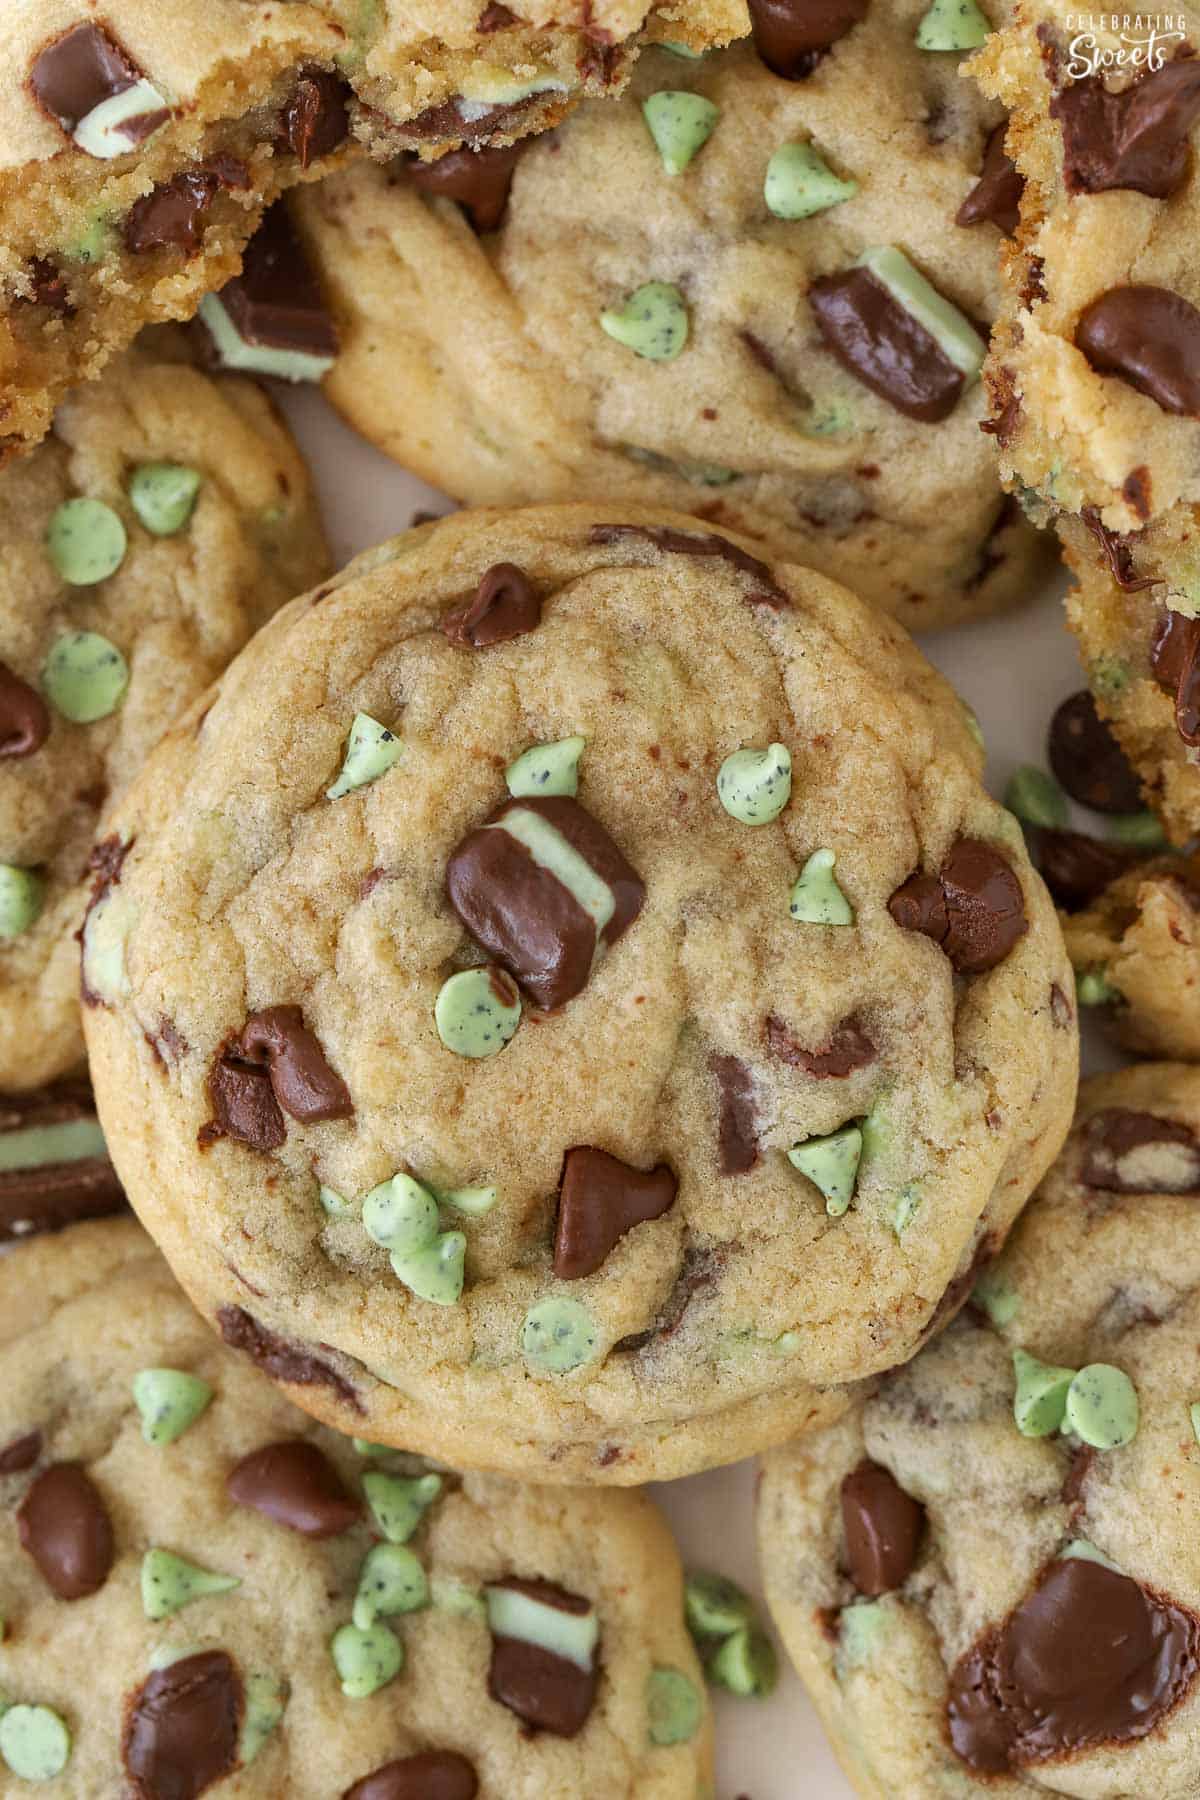 Mint chocolate chip cookies on parchment paper.